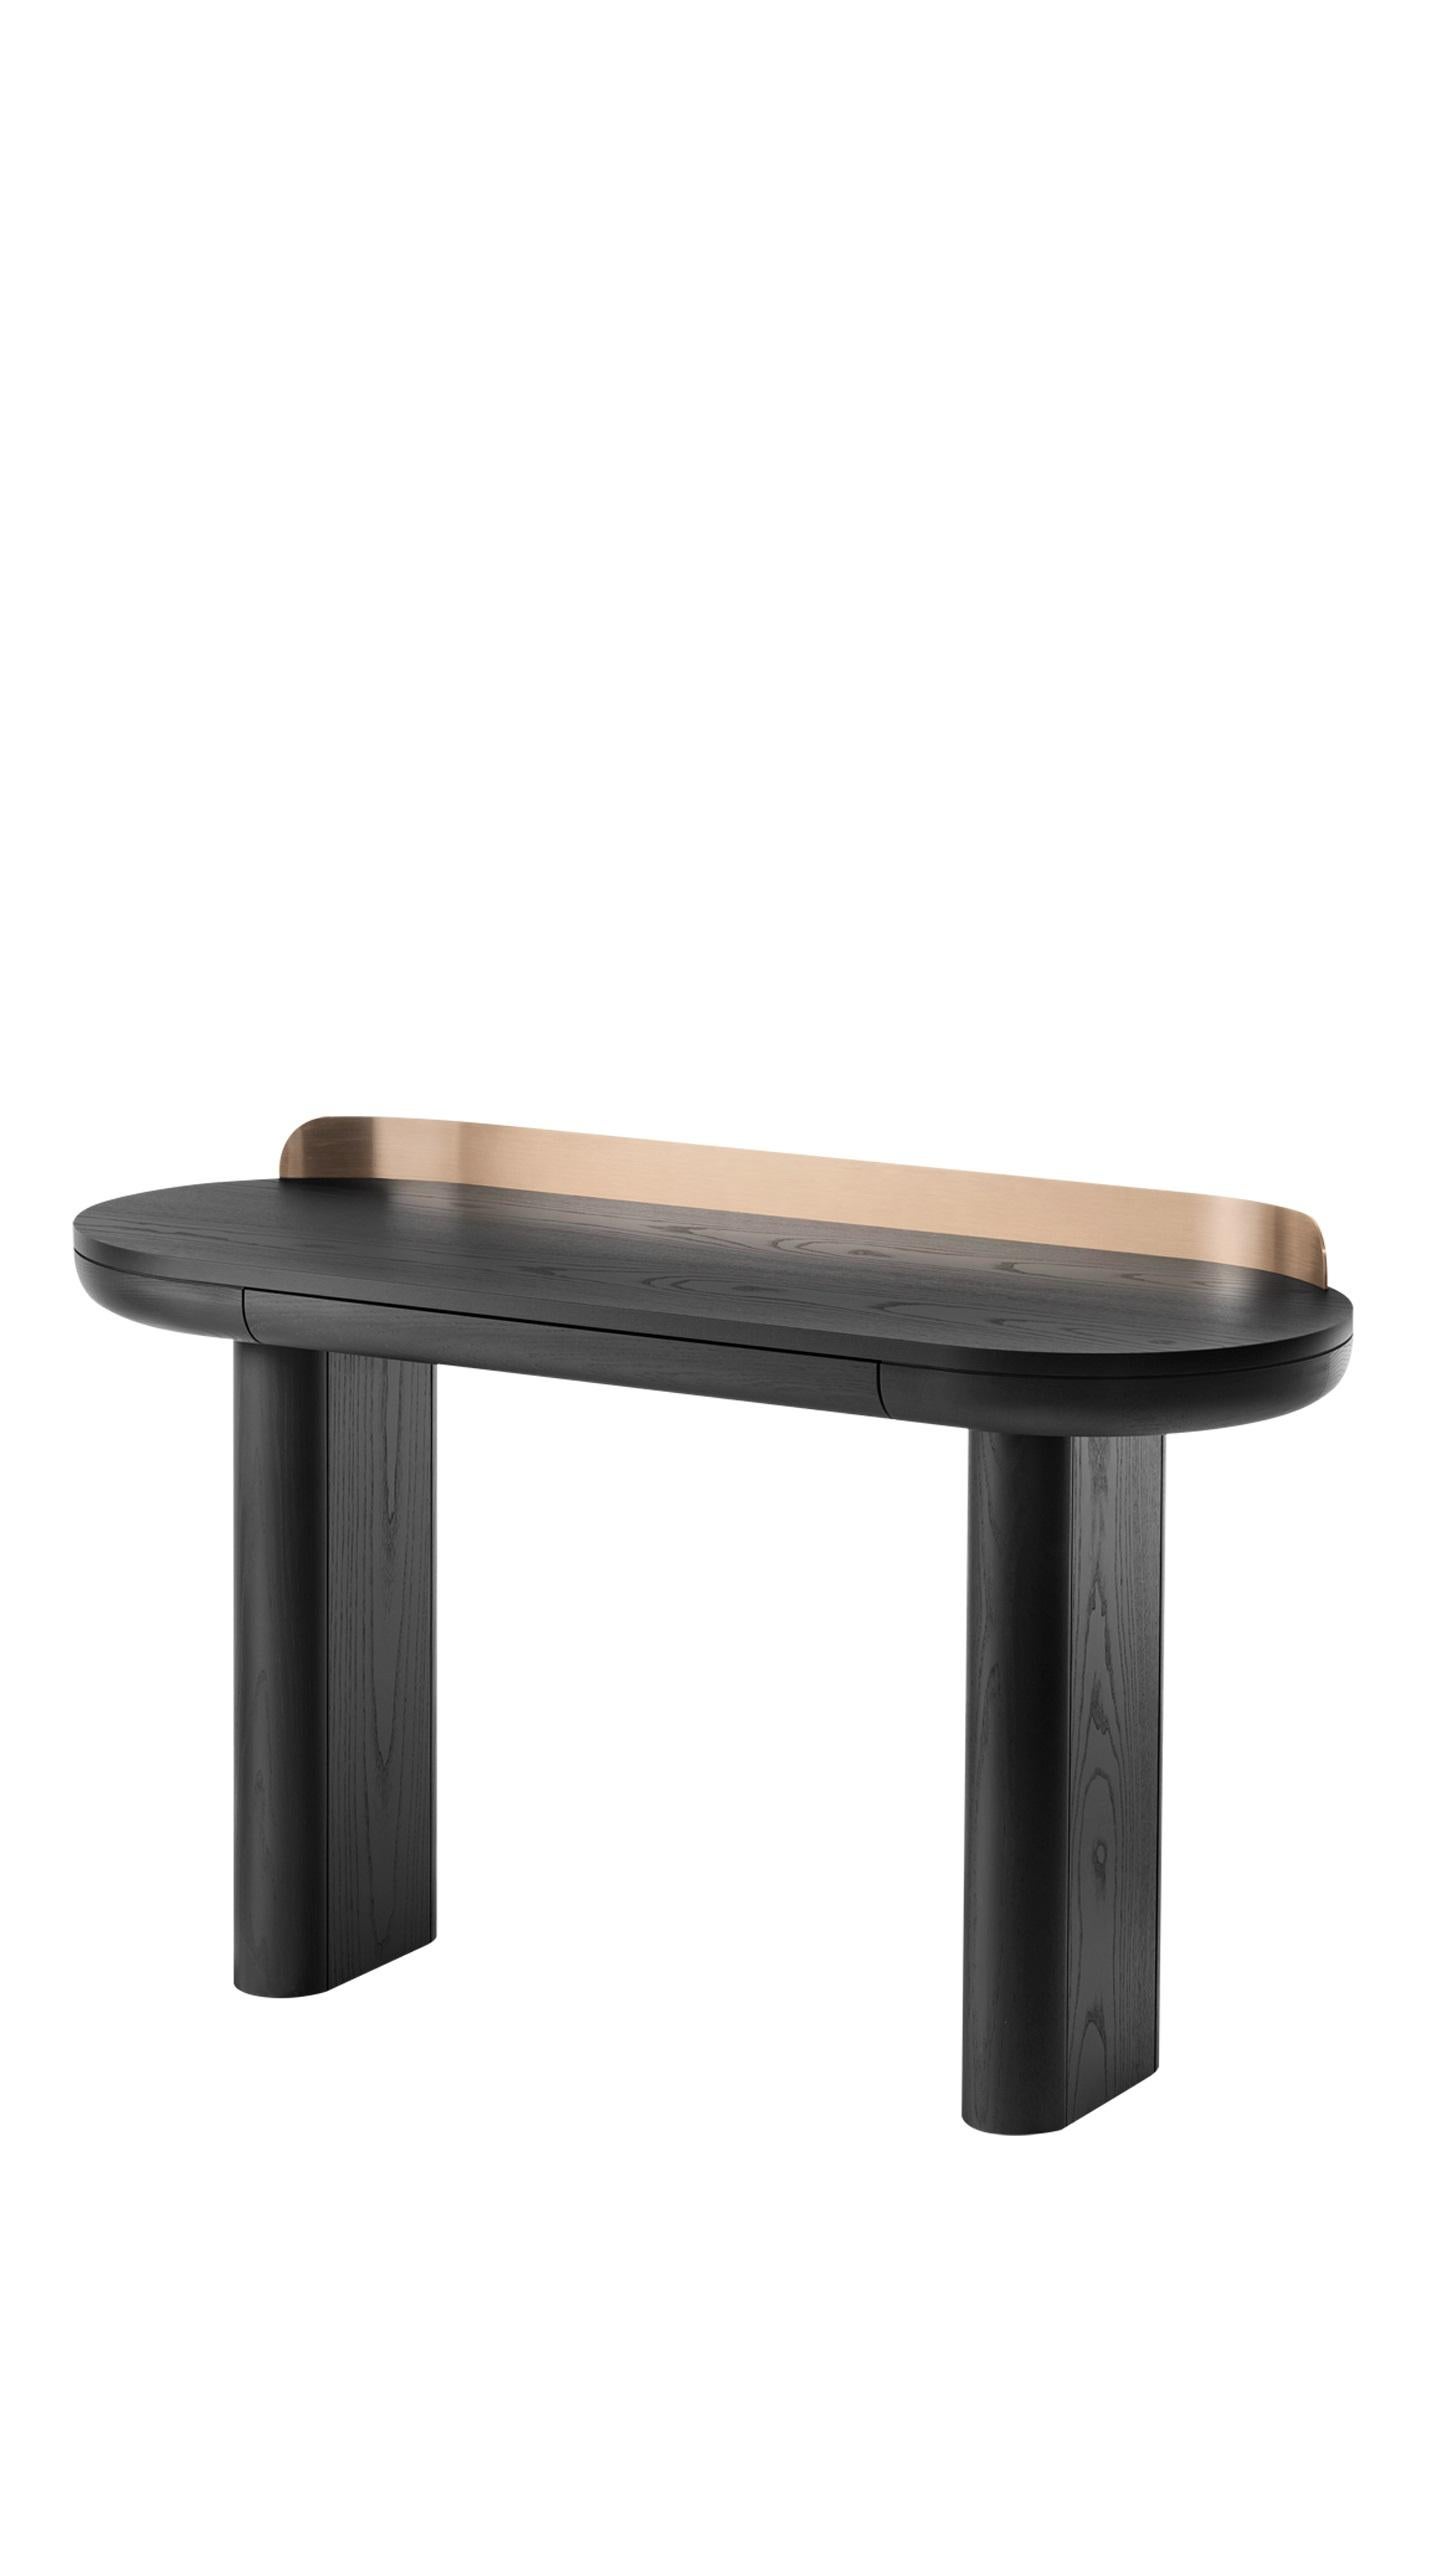 For Sale: Orange (Copper Metal) Jumbo Table with Structure in Black Ash, by Paolo Cappello 4